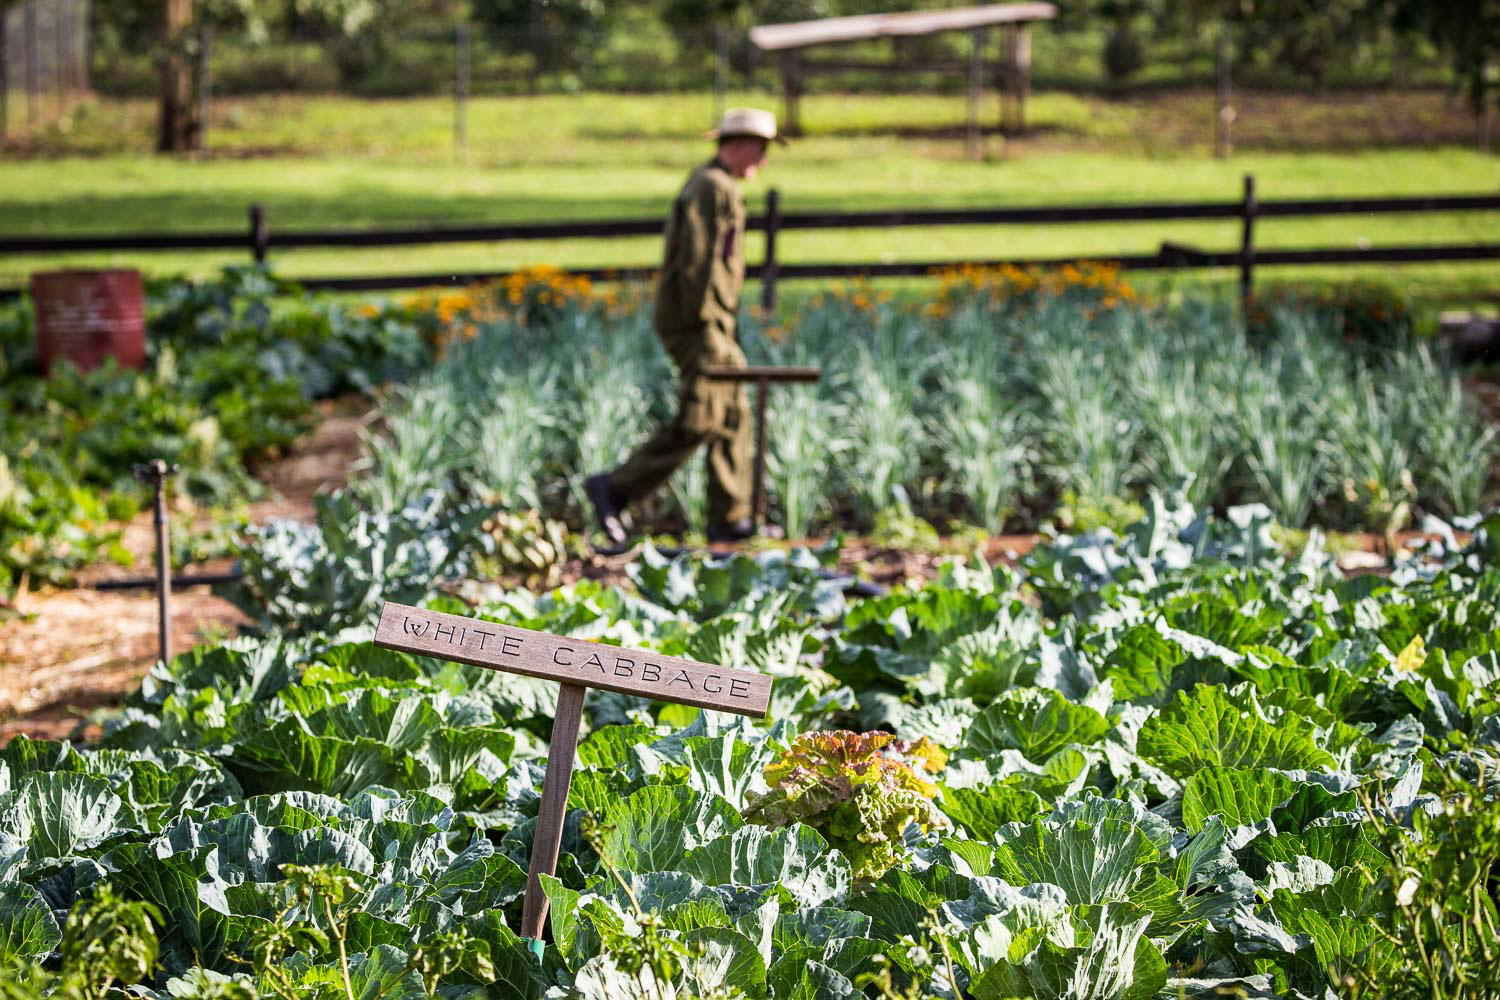 Our food philosophy is founded on farm fresh, organic cuisine prepared daily right here on the property.